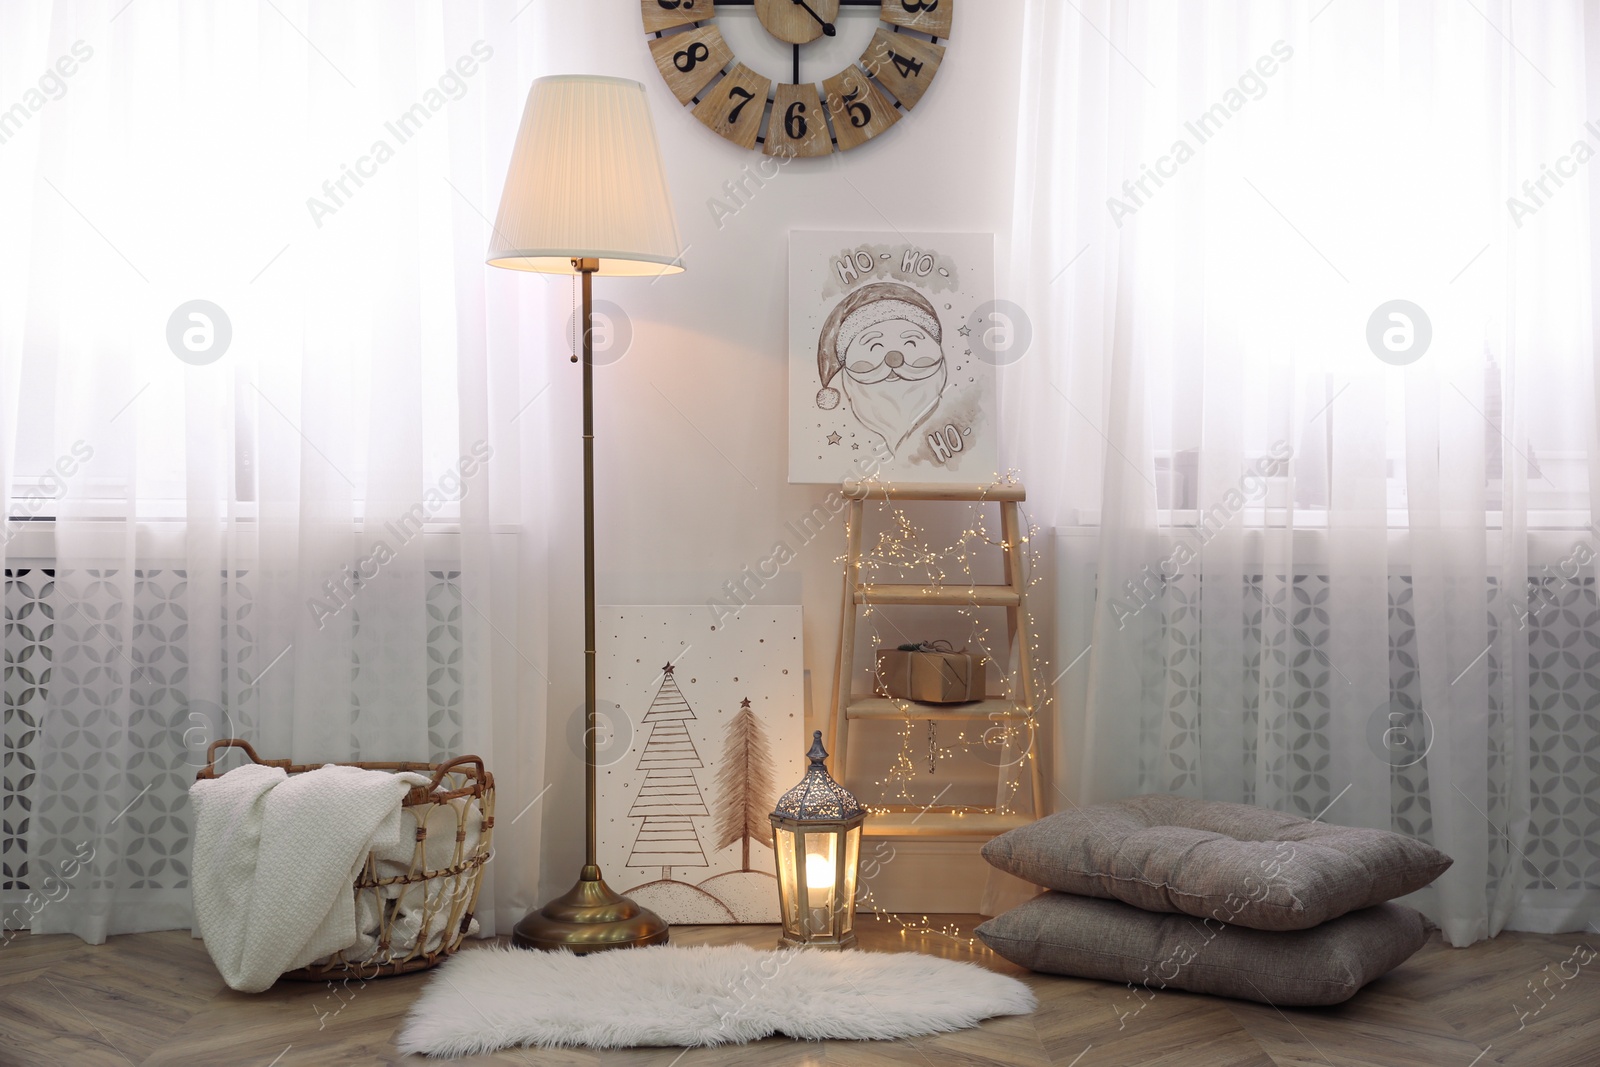 Photo of Beautiful Christmas pictures in festive room interior